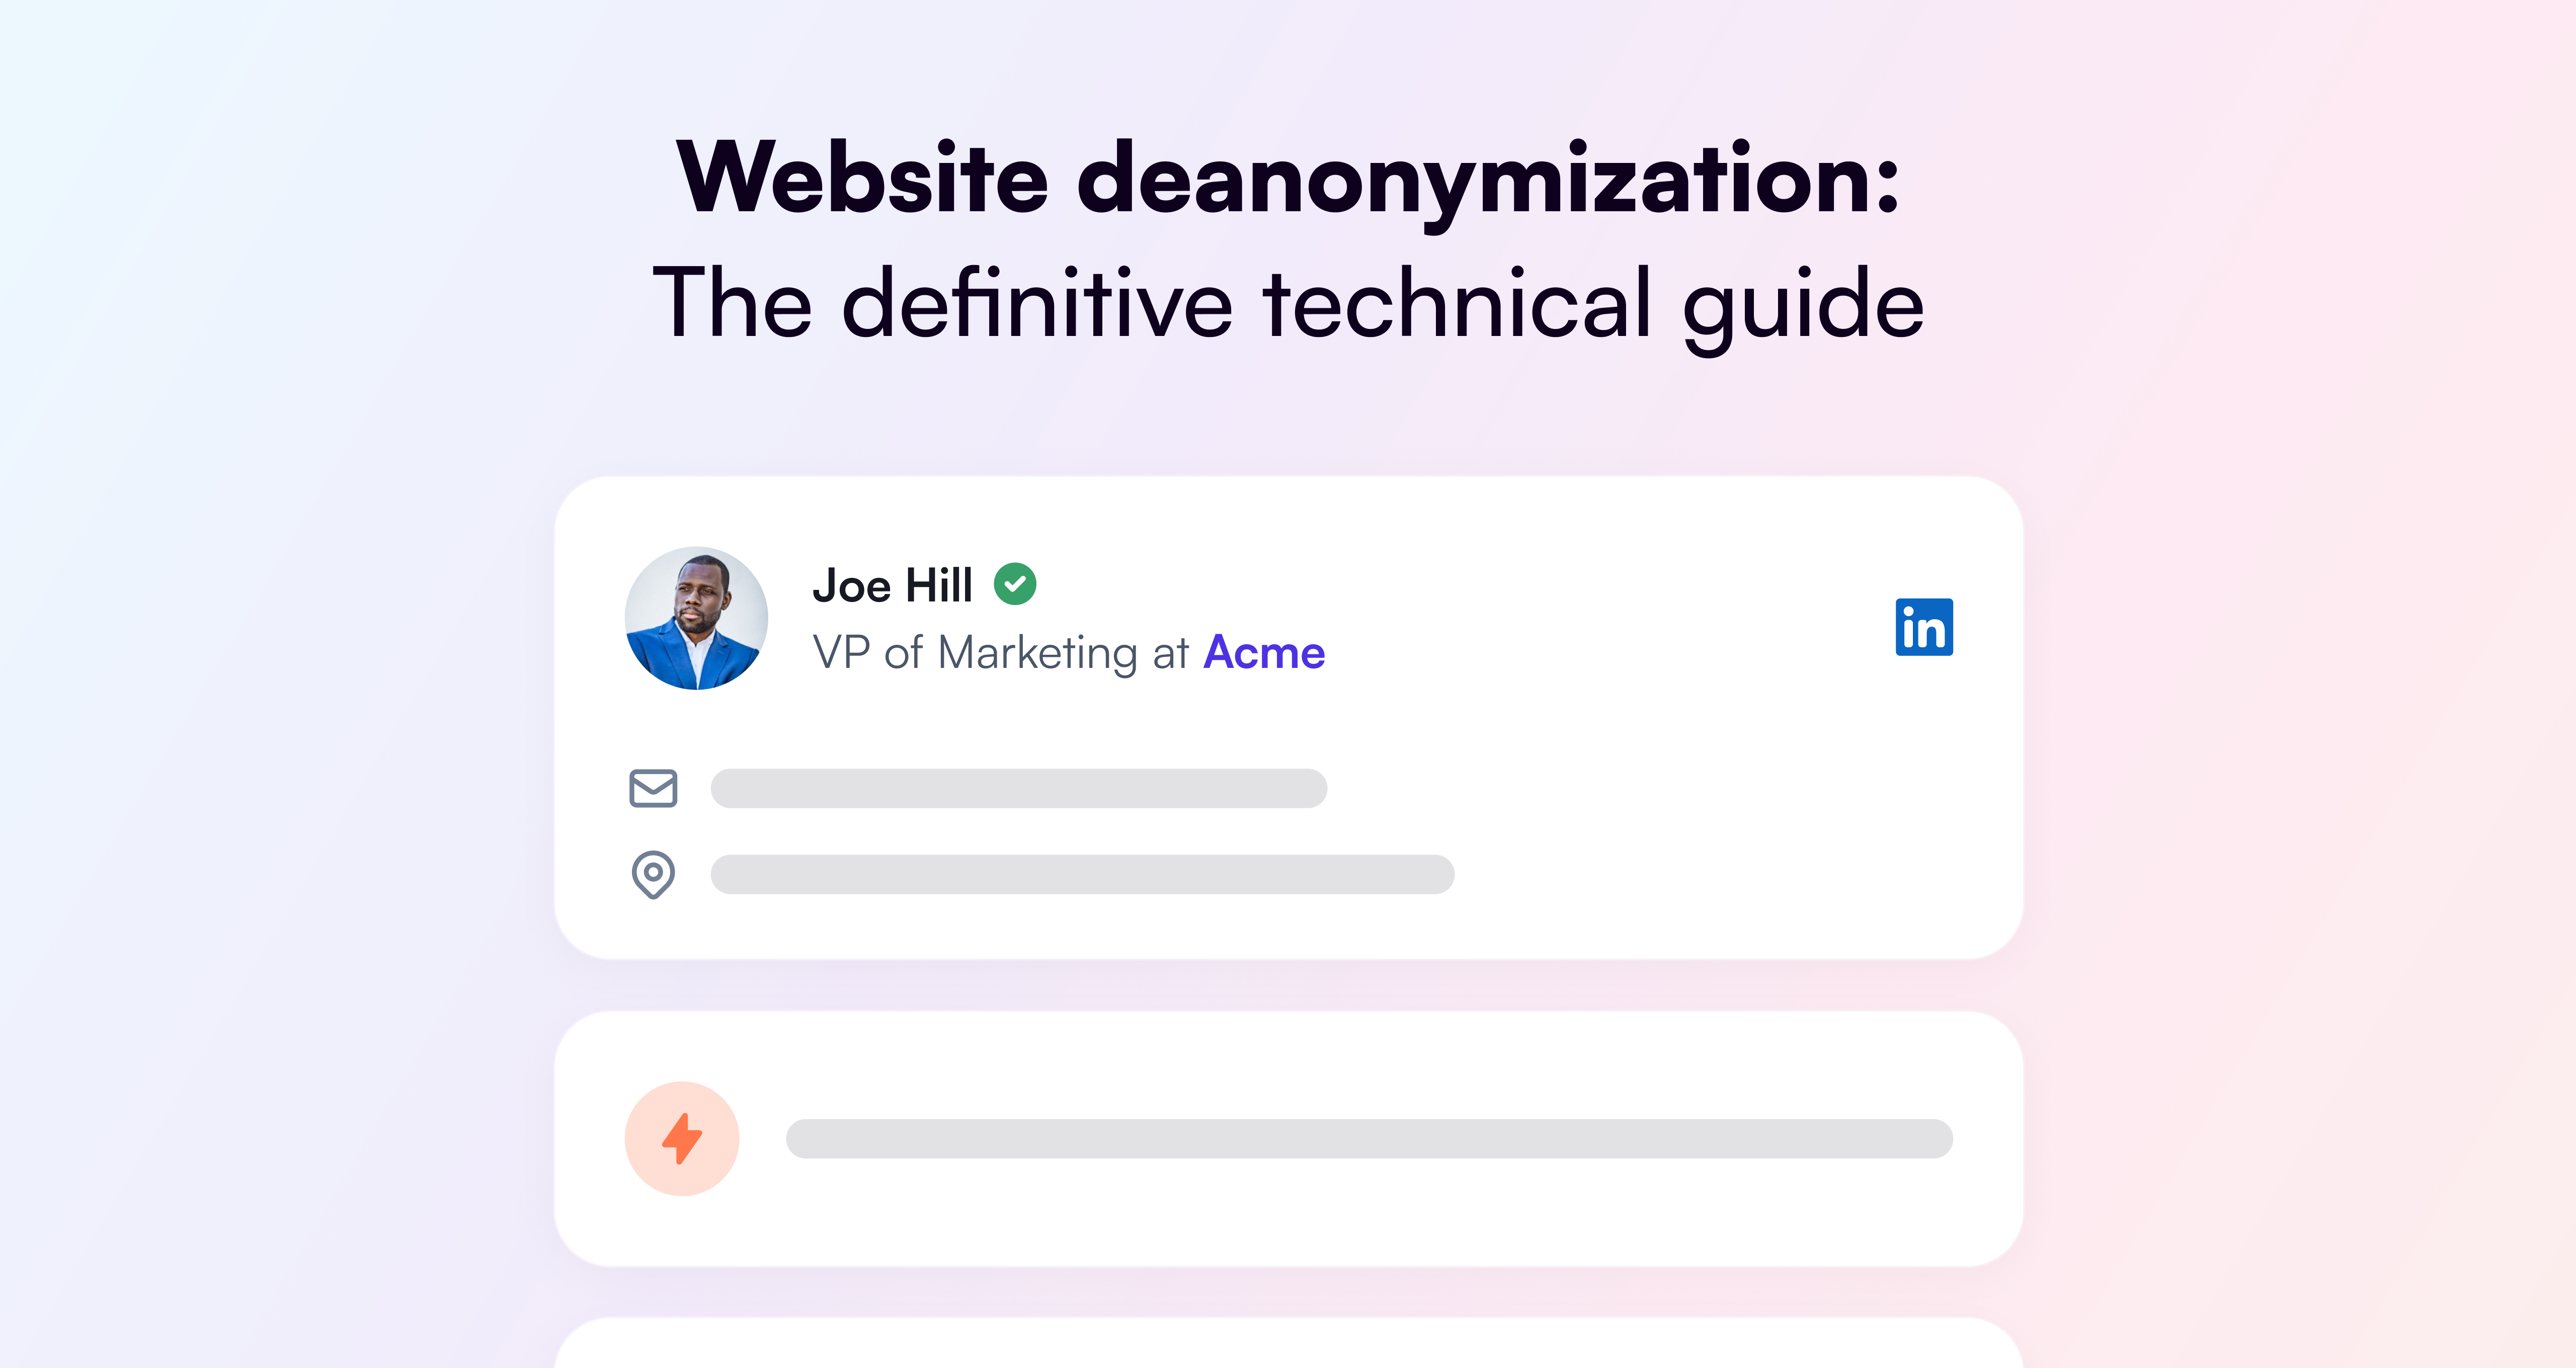 Website deanonymization: the definitive technical guide